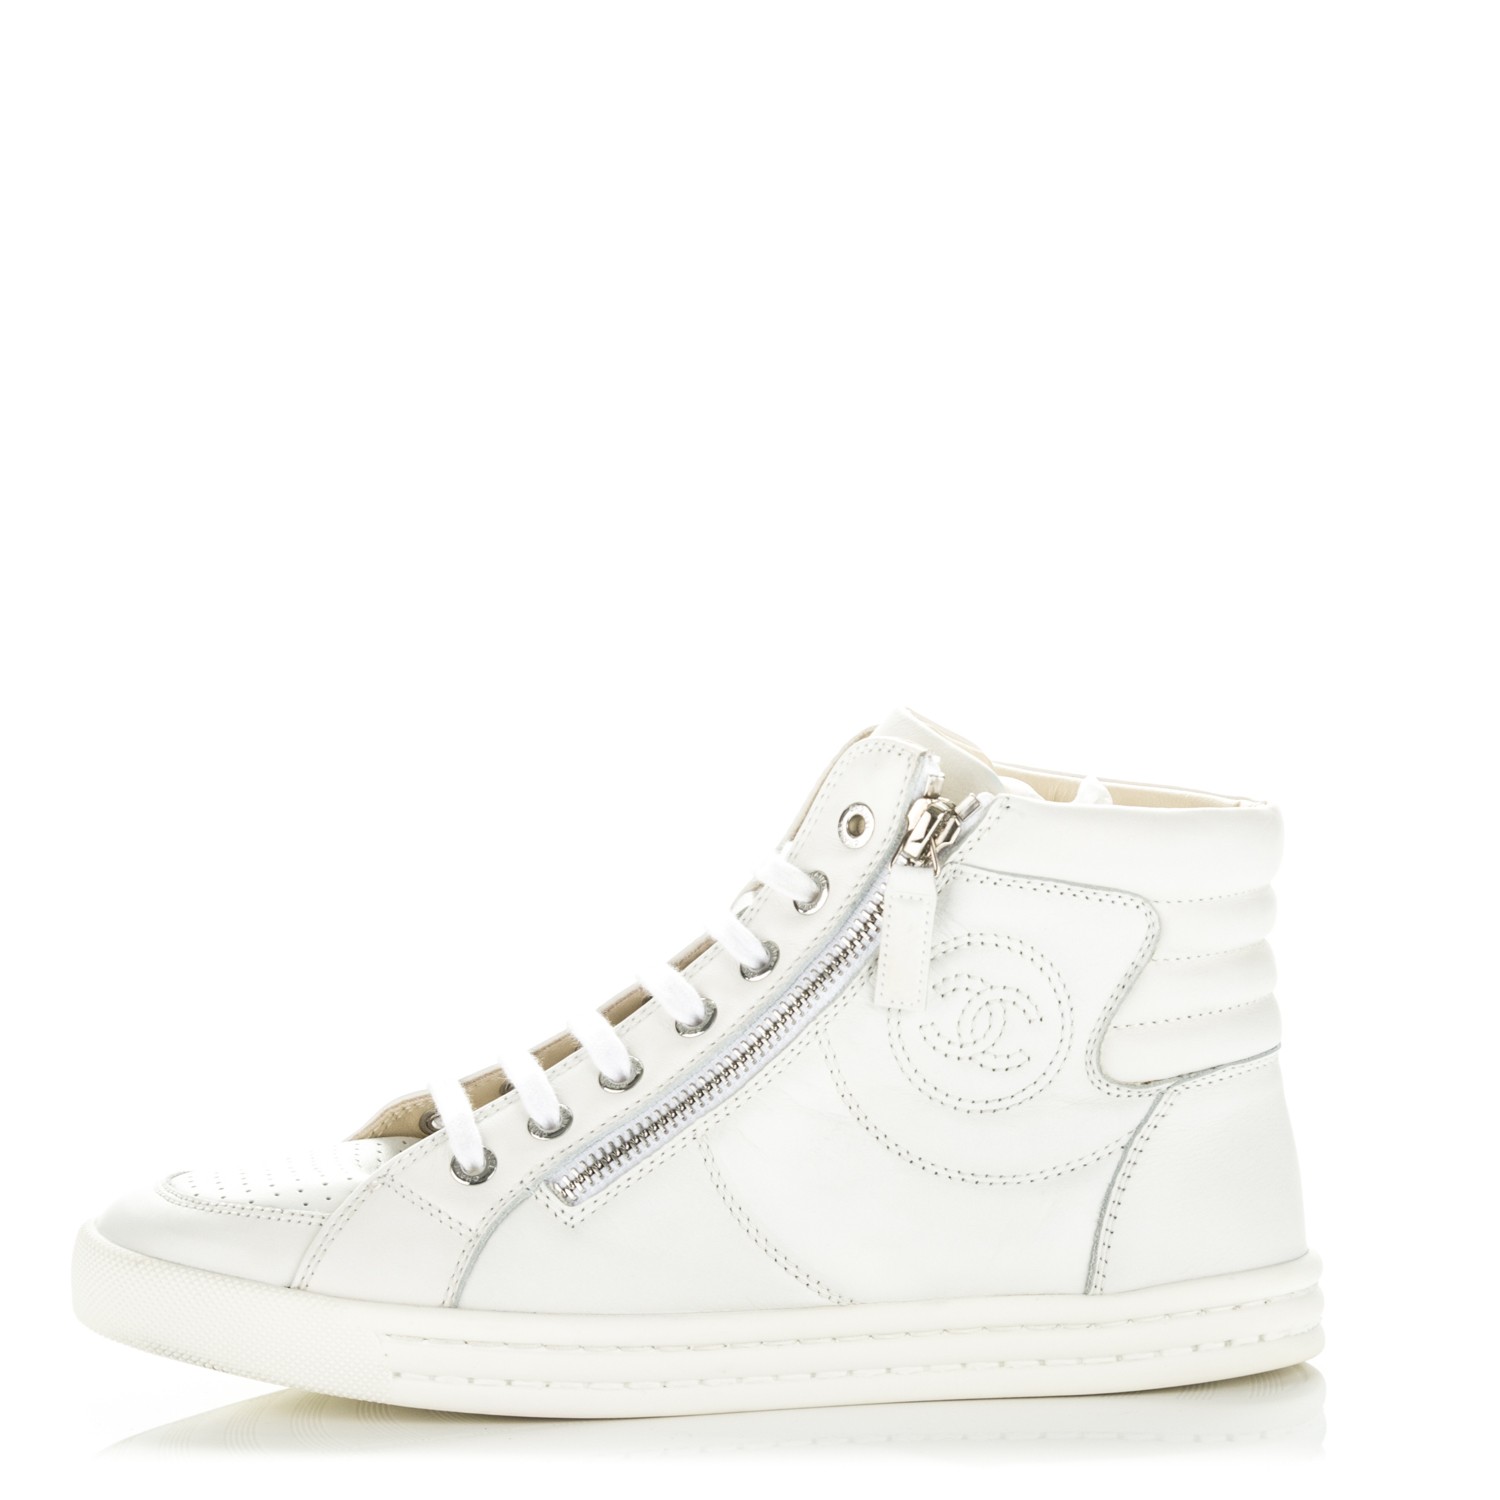 chanel white high top sneakers